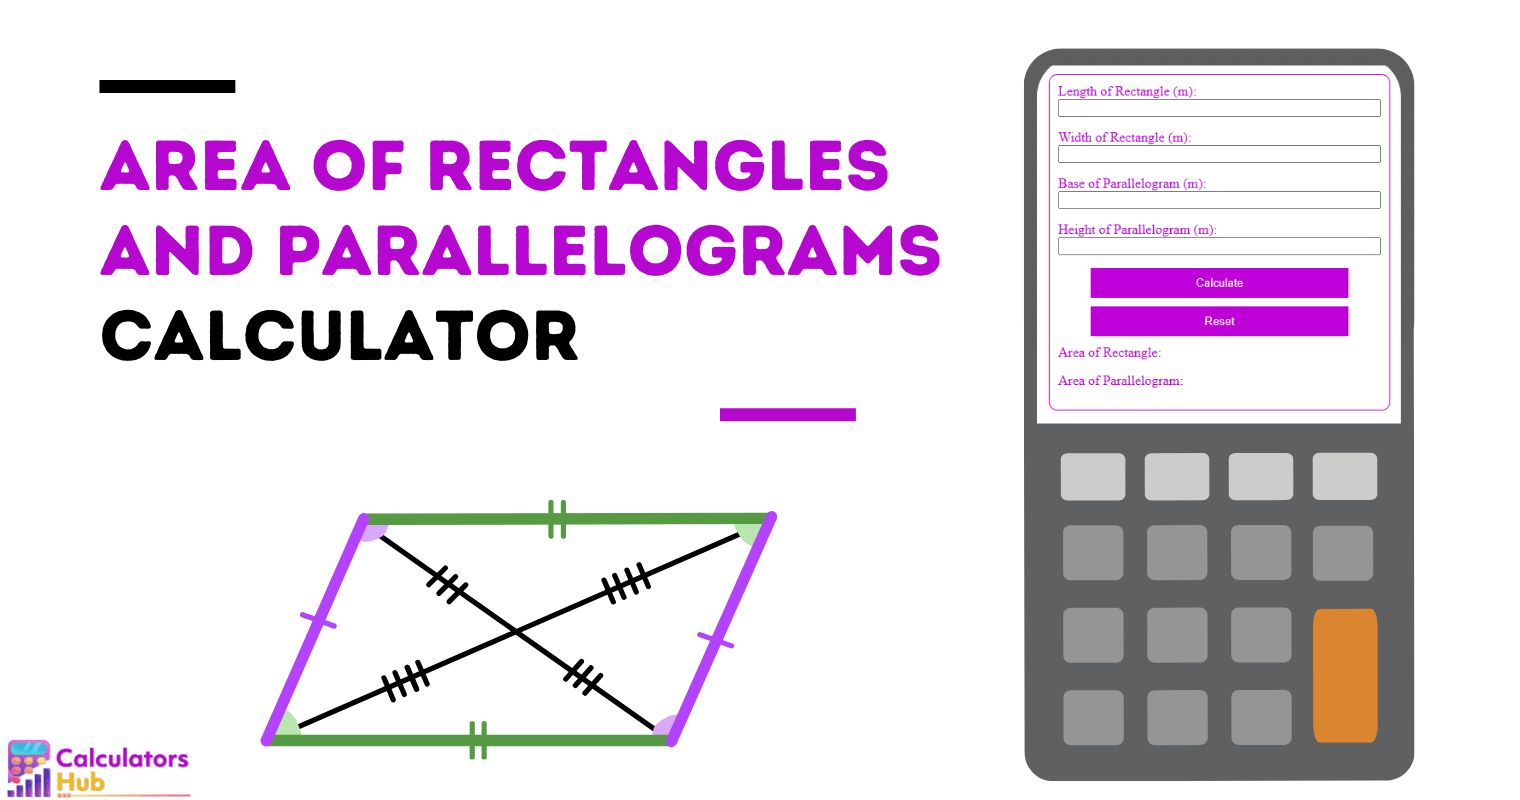 Area of Rectangles and Parallelograms Calculator